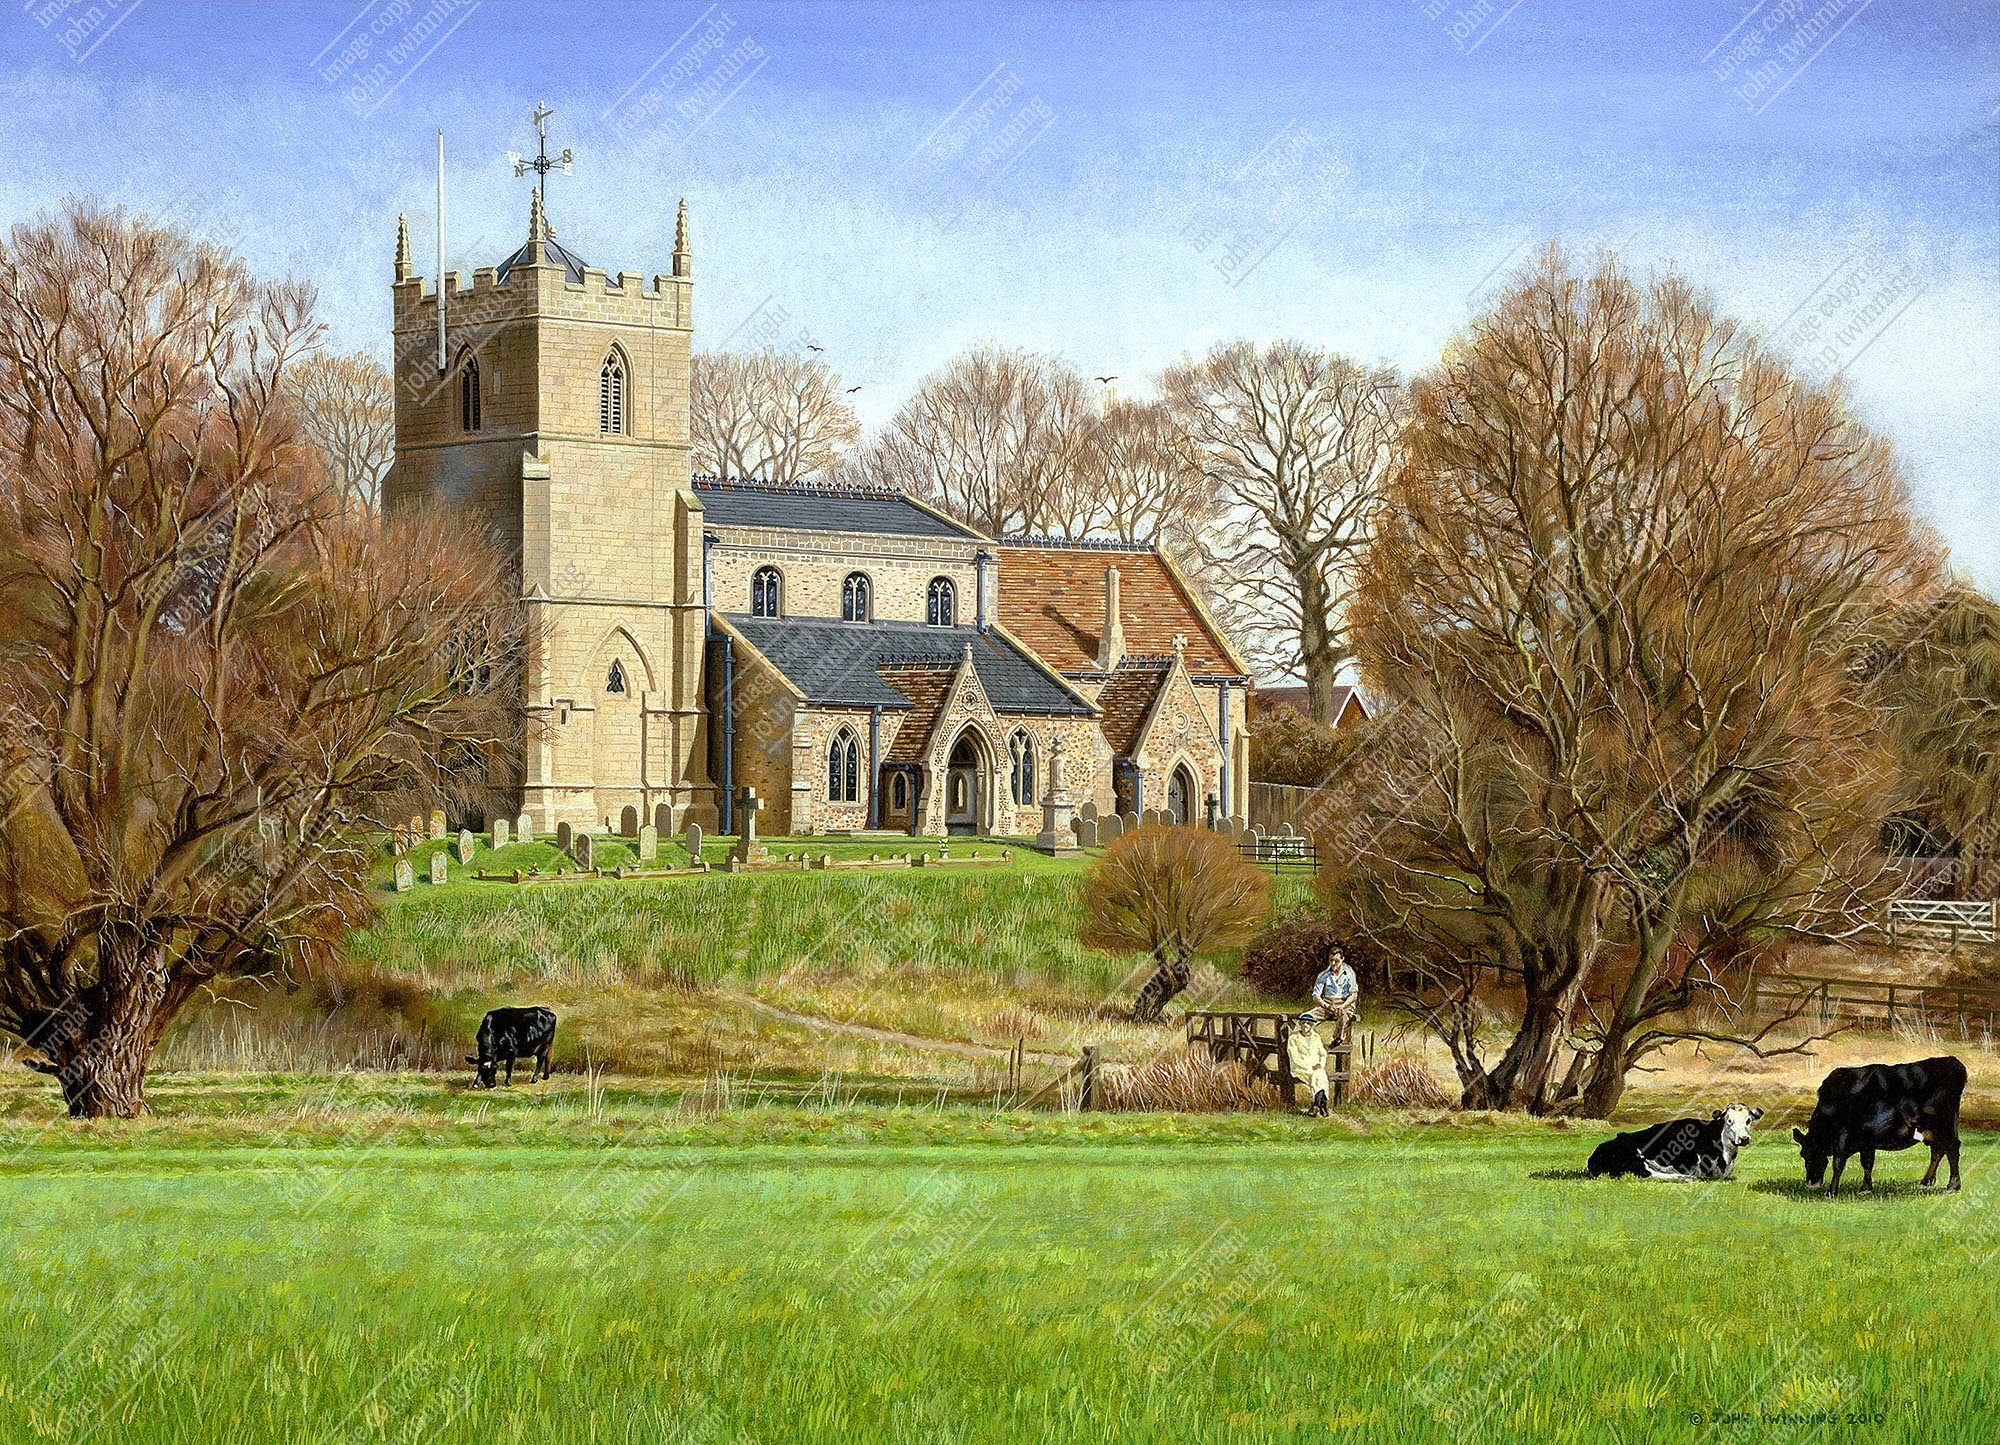 'St. John The Baptist Church Holywell, Spring' - art print from a commissioned painting of this cambridgeshire village's church